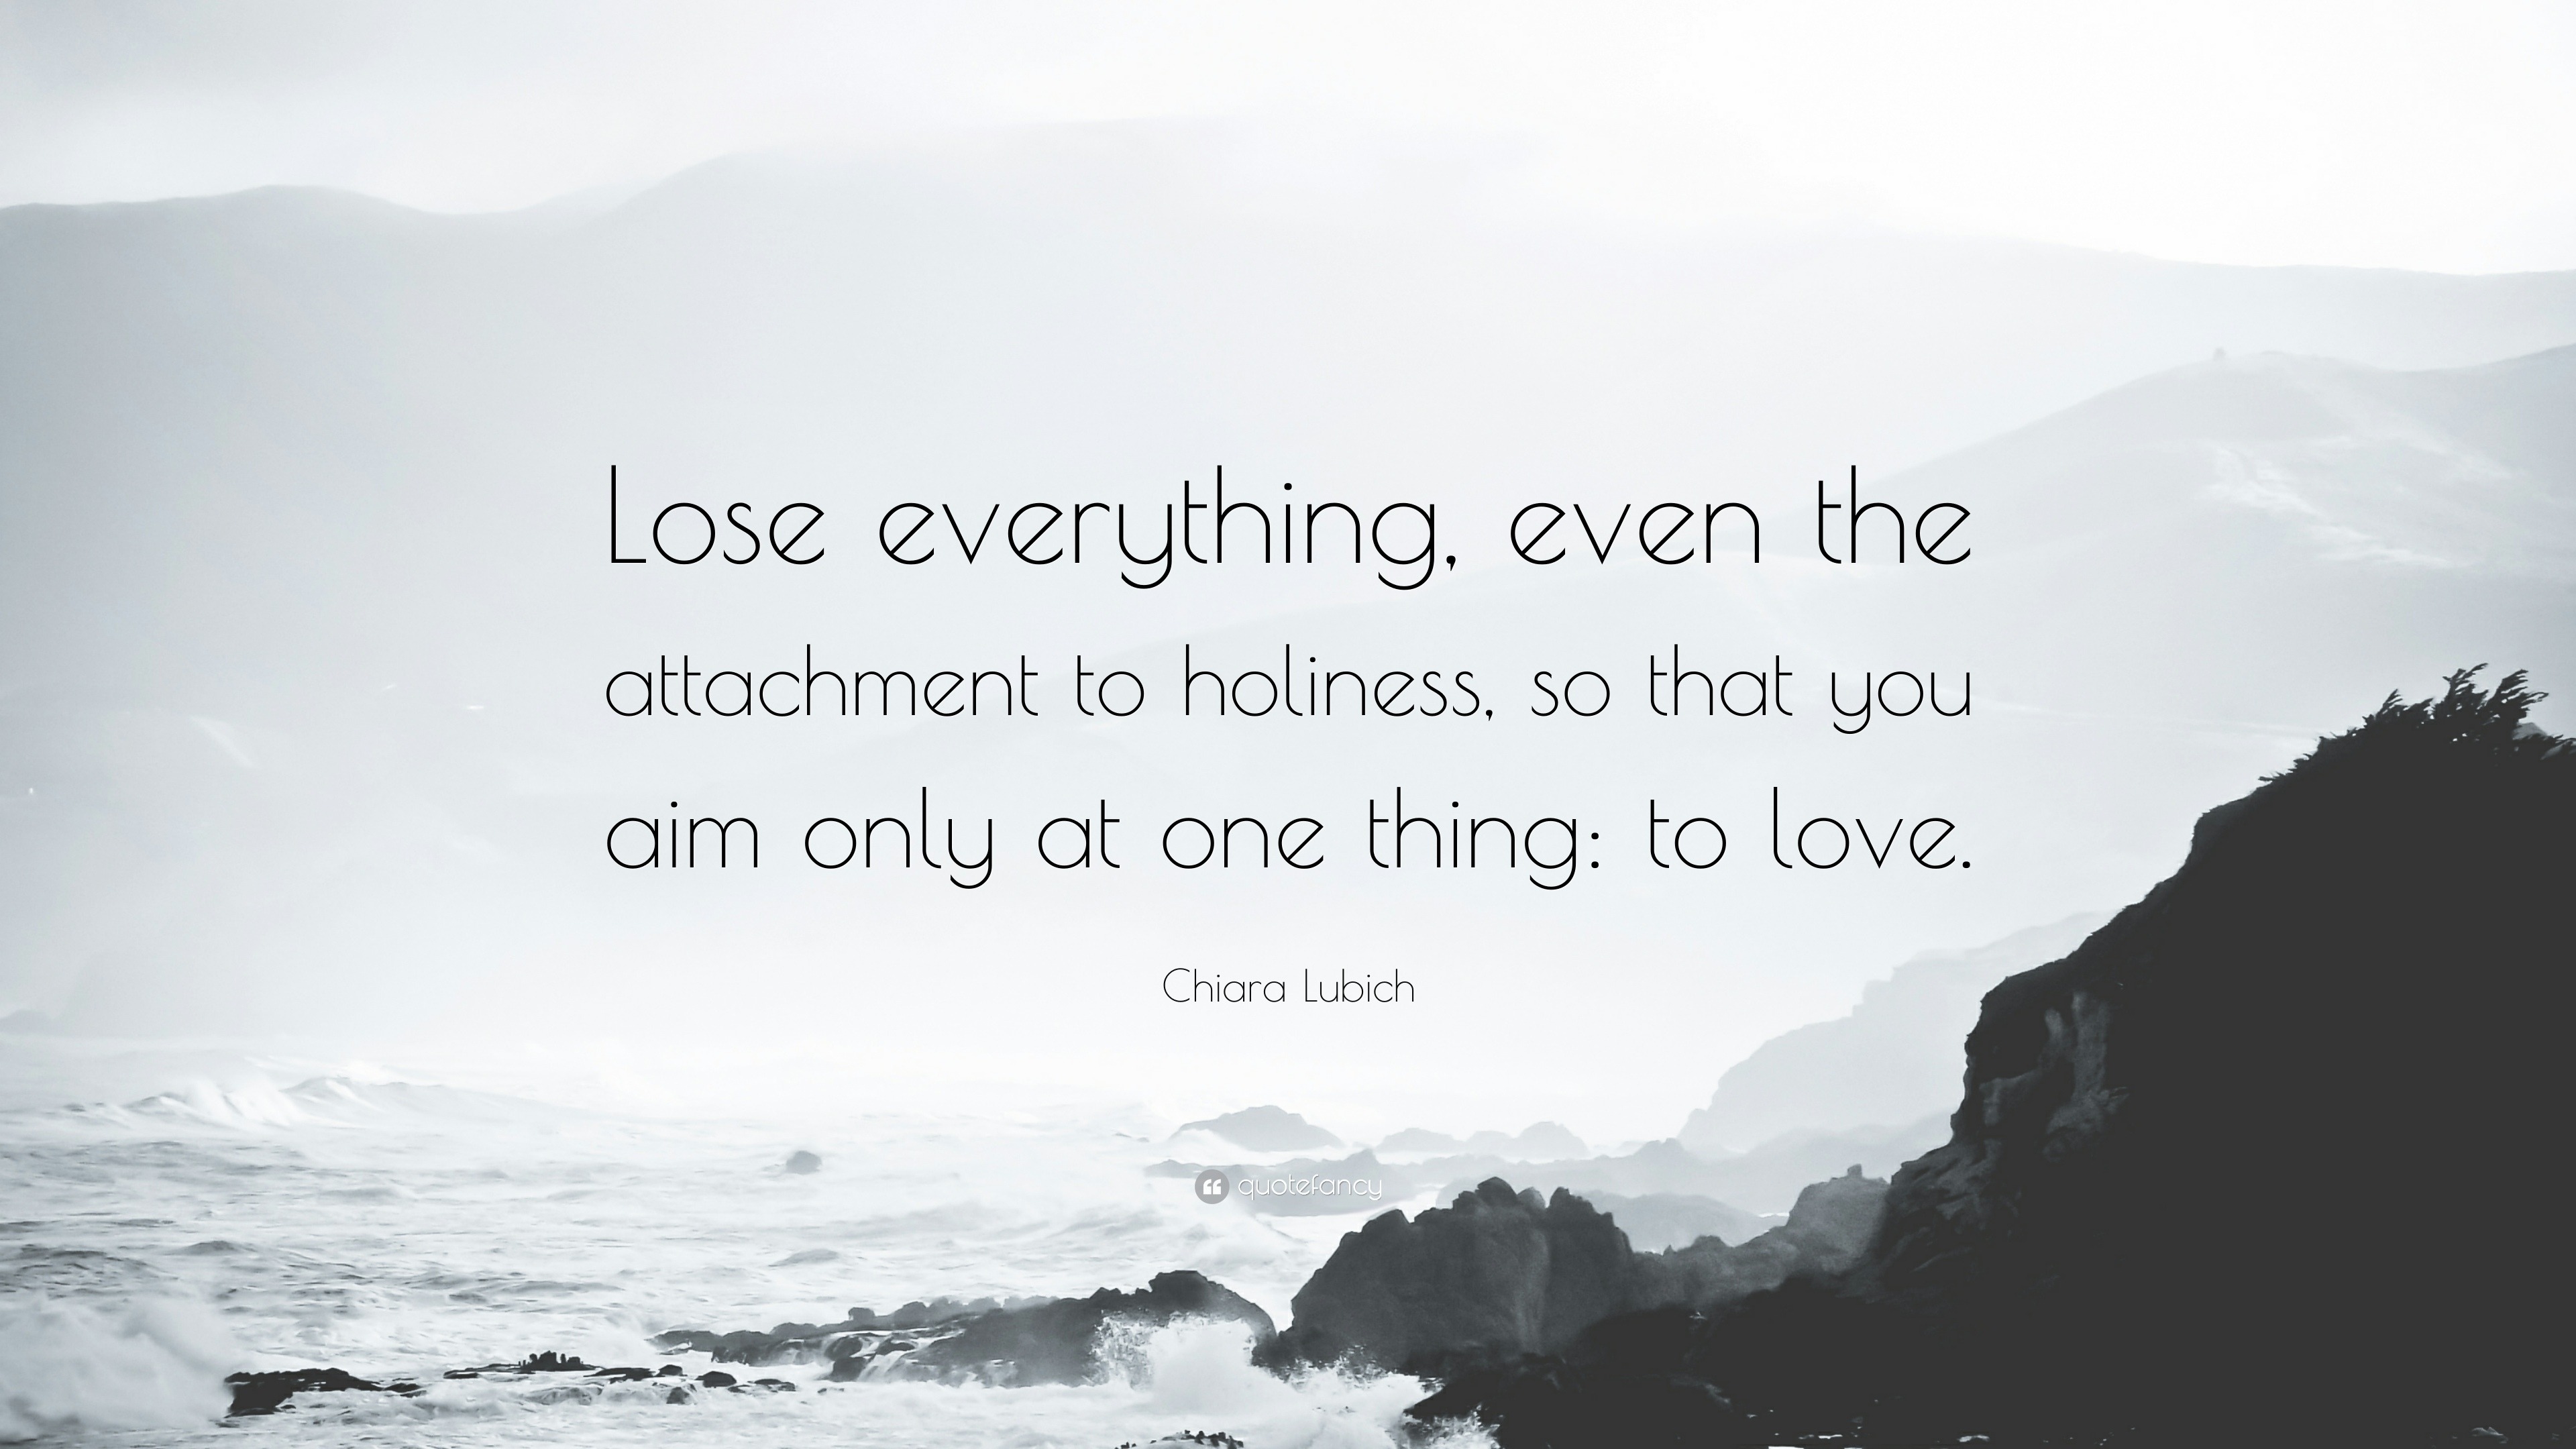 Chiara Lubich Quote “Lose everything even the attachment to holiness so that